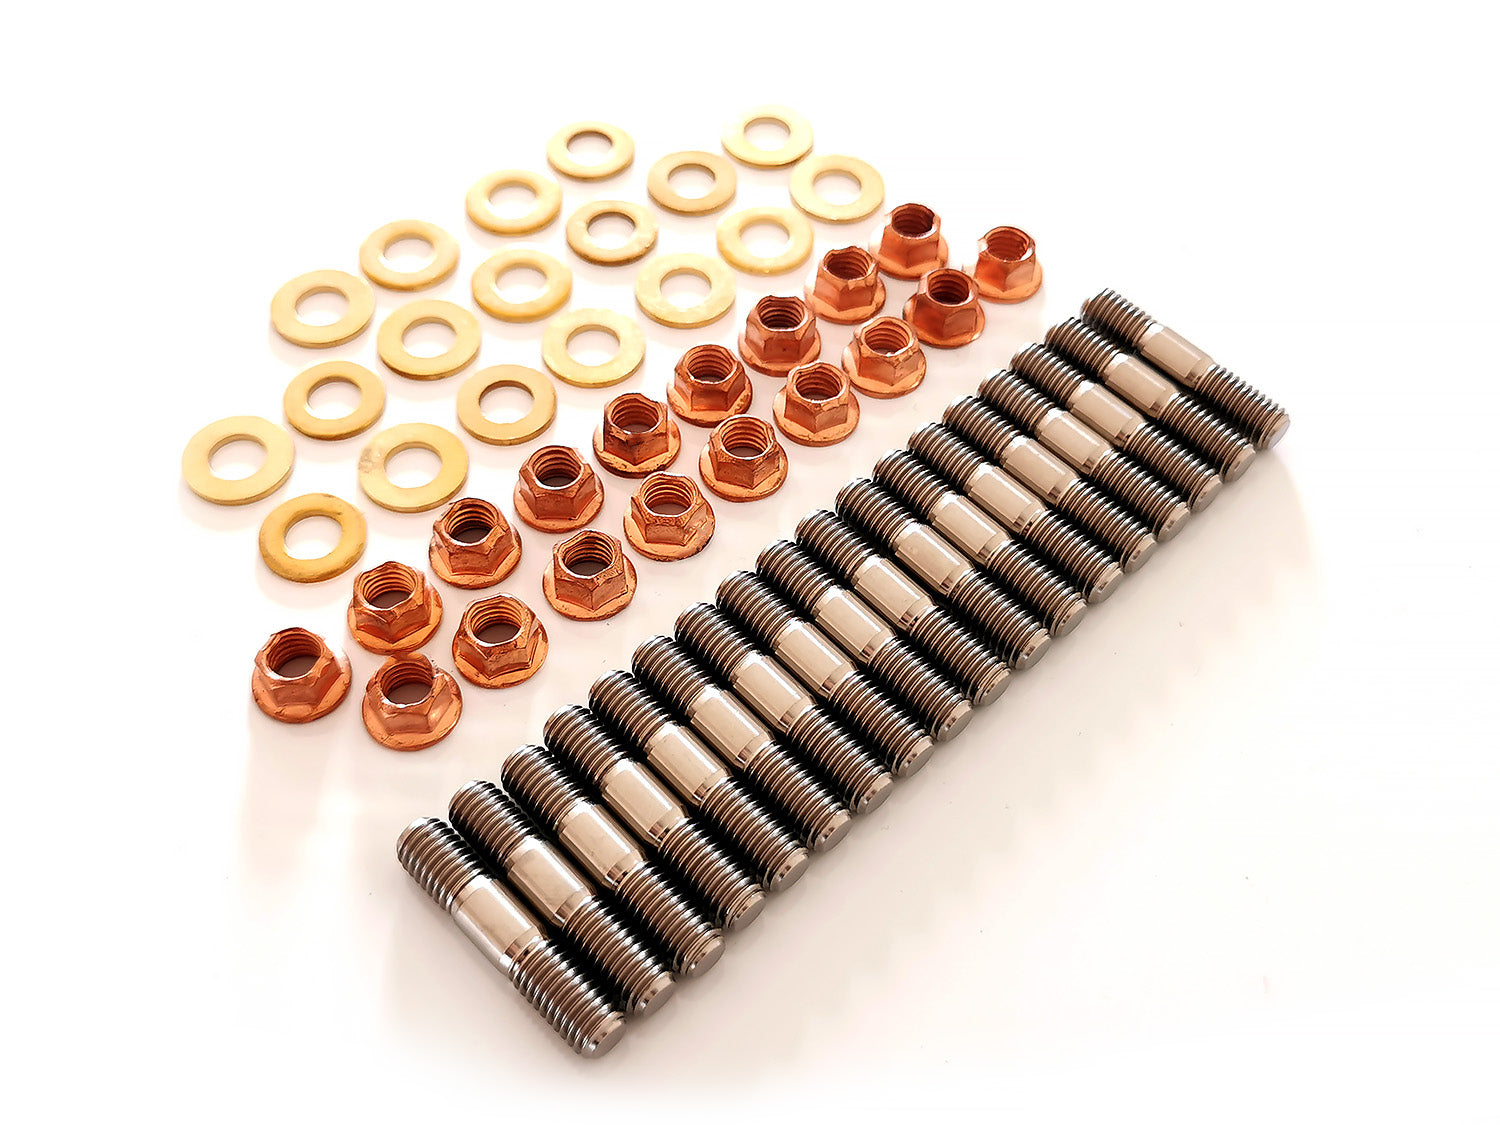 An aerial view of a STG Titanium exhaust manifold stud kit which includes 18 Titanium studs, 18 hex copper K-nuts & 18 brass washers